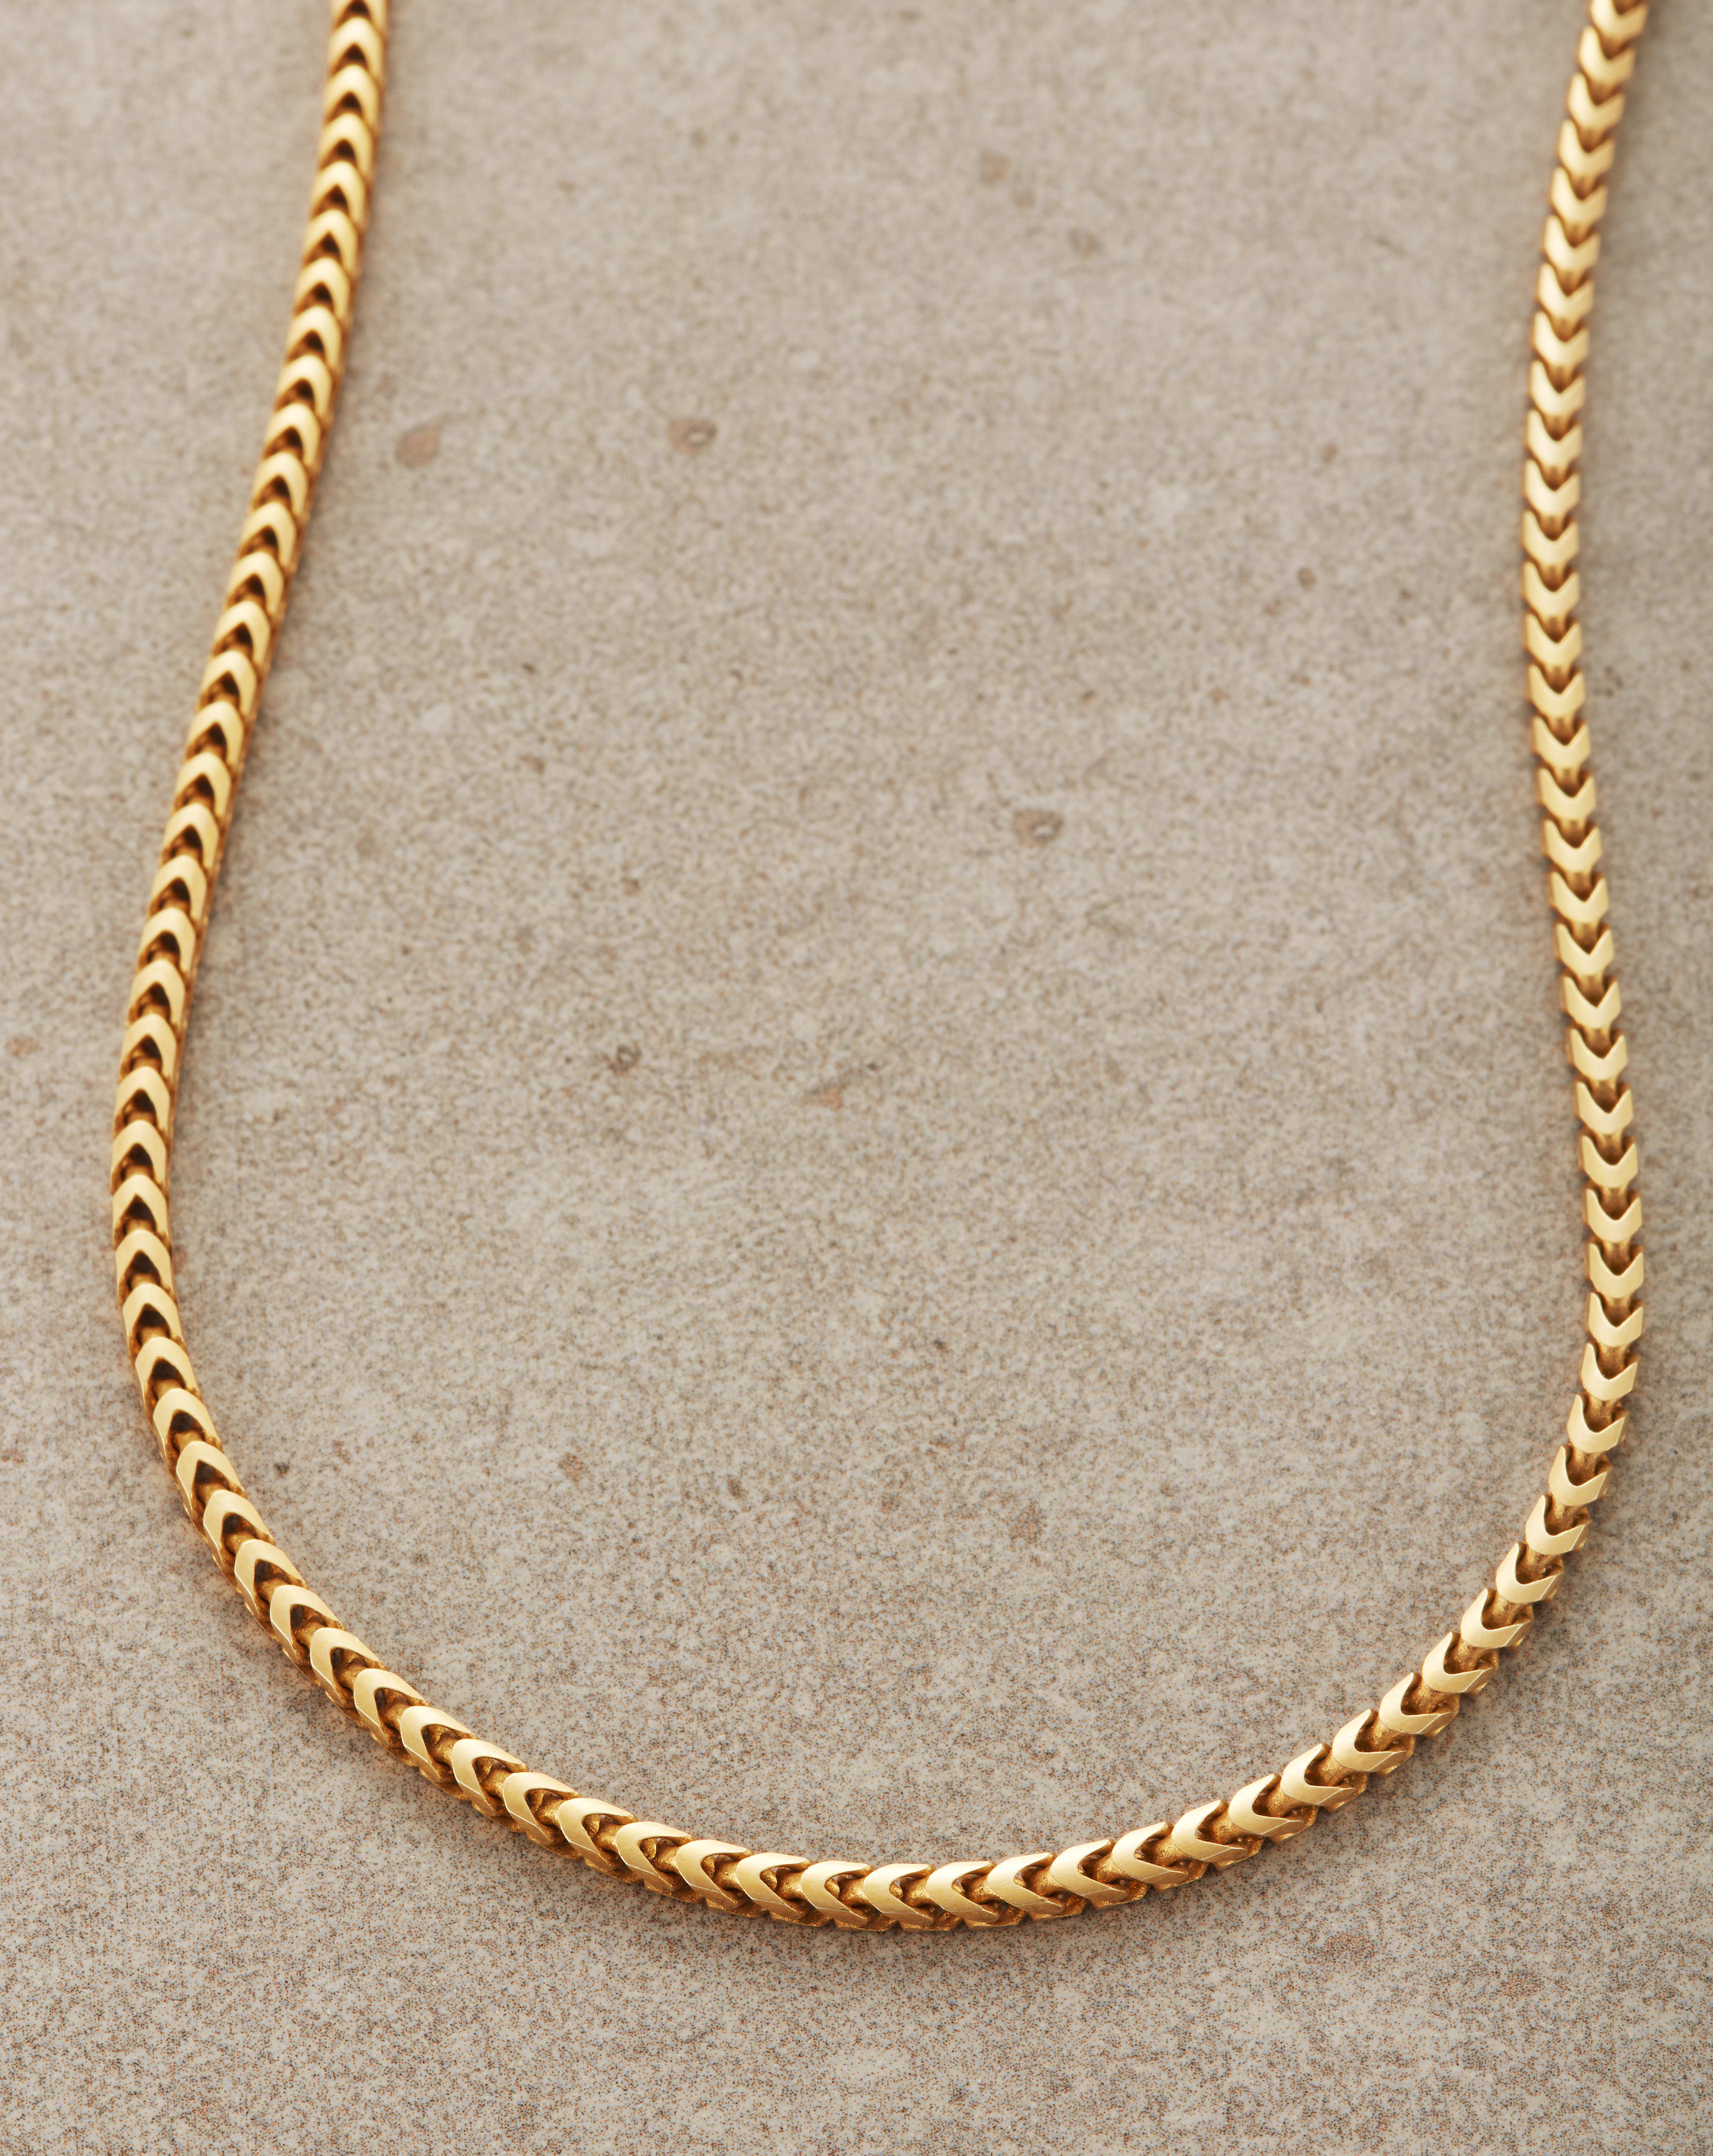 Image Franco Chain - 3mm Gold - Higher Quality Standards